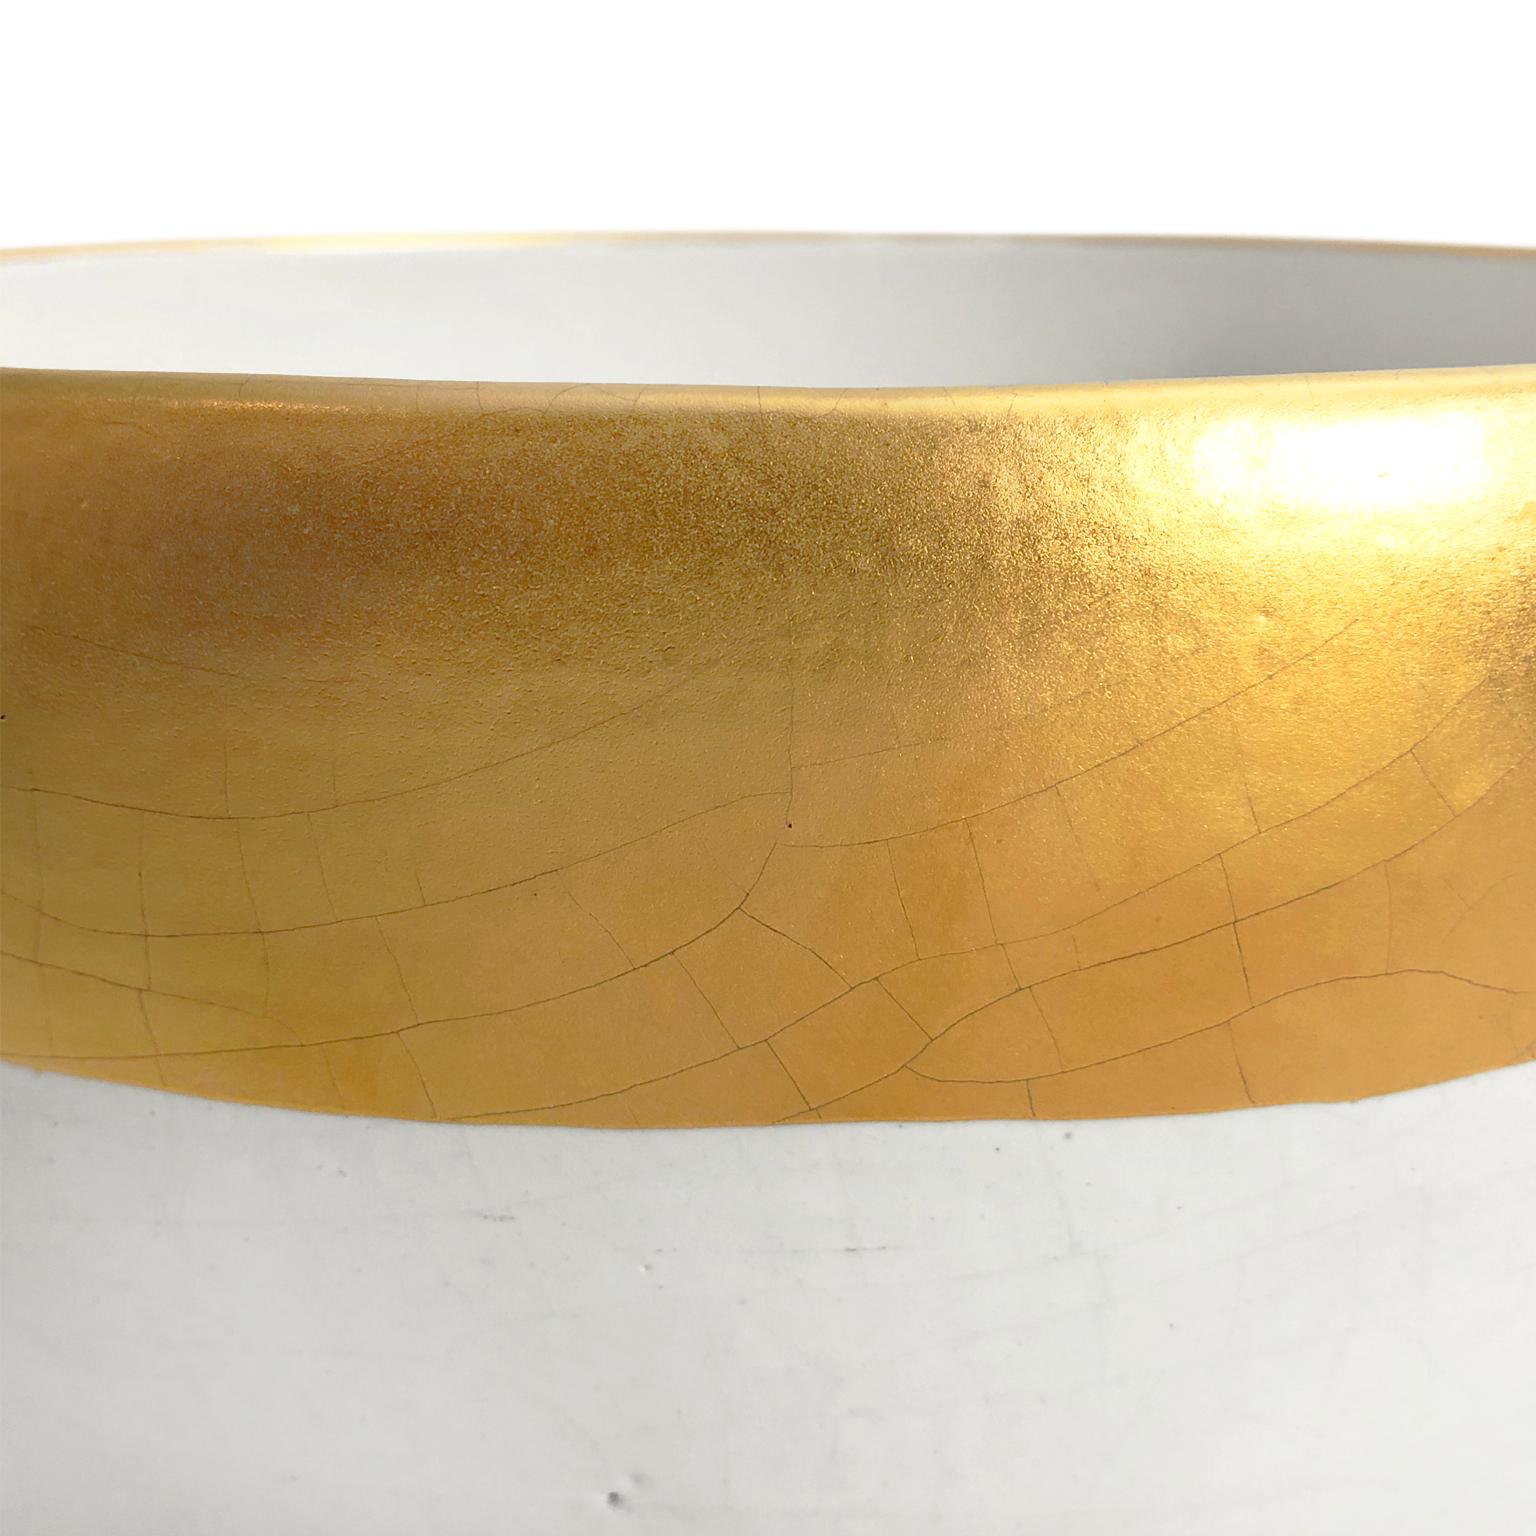 Large curved ceramic bowl with white crackle glaze and 22k matte gold band by Sandi Fellman, 2019.

Veteran photographer Sandi Fellman's ceramic vessels are an exploration of a new medium. The forms, palettes, and sensuality of her photos can be